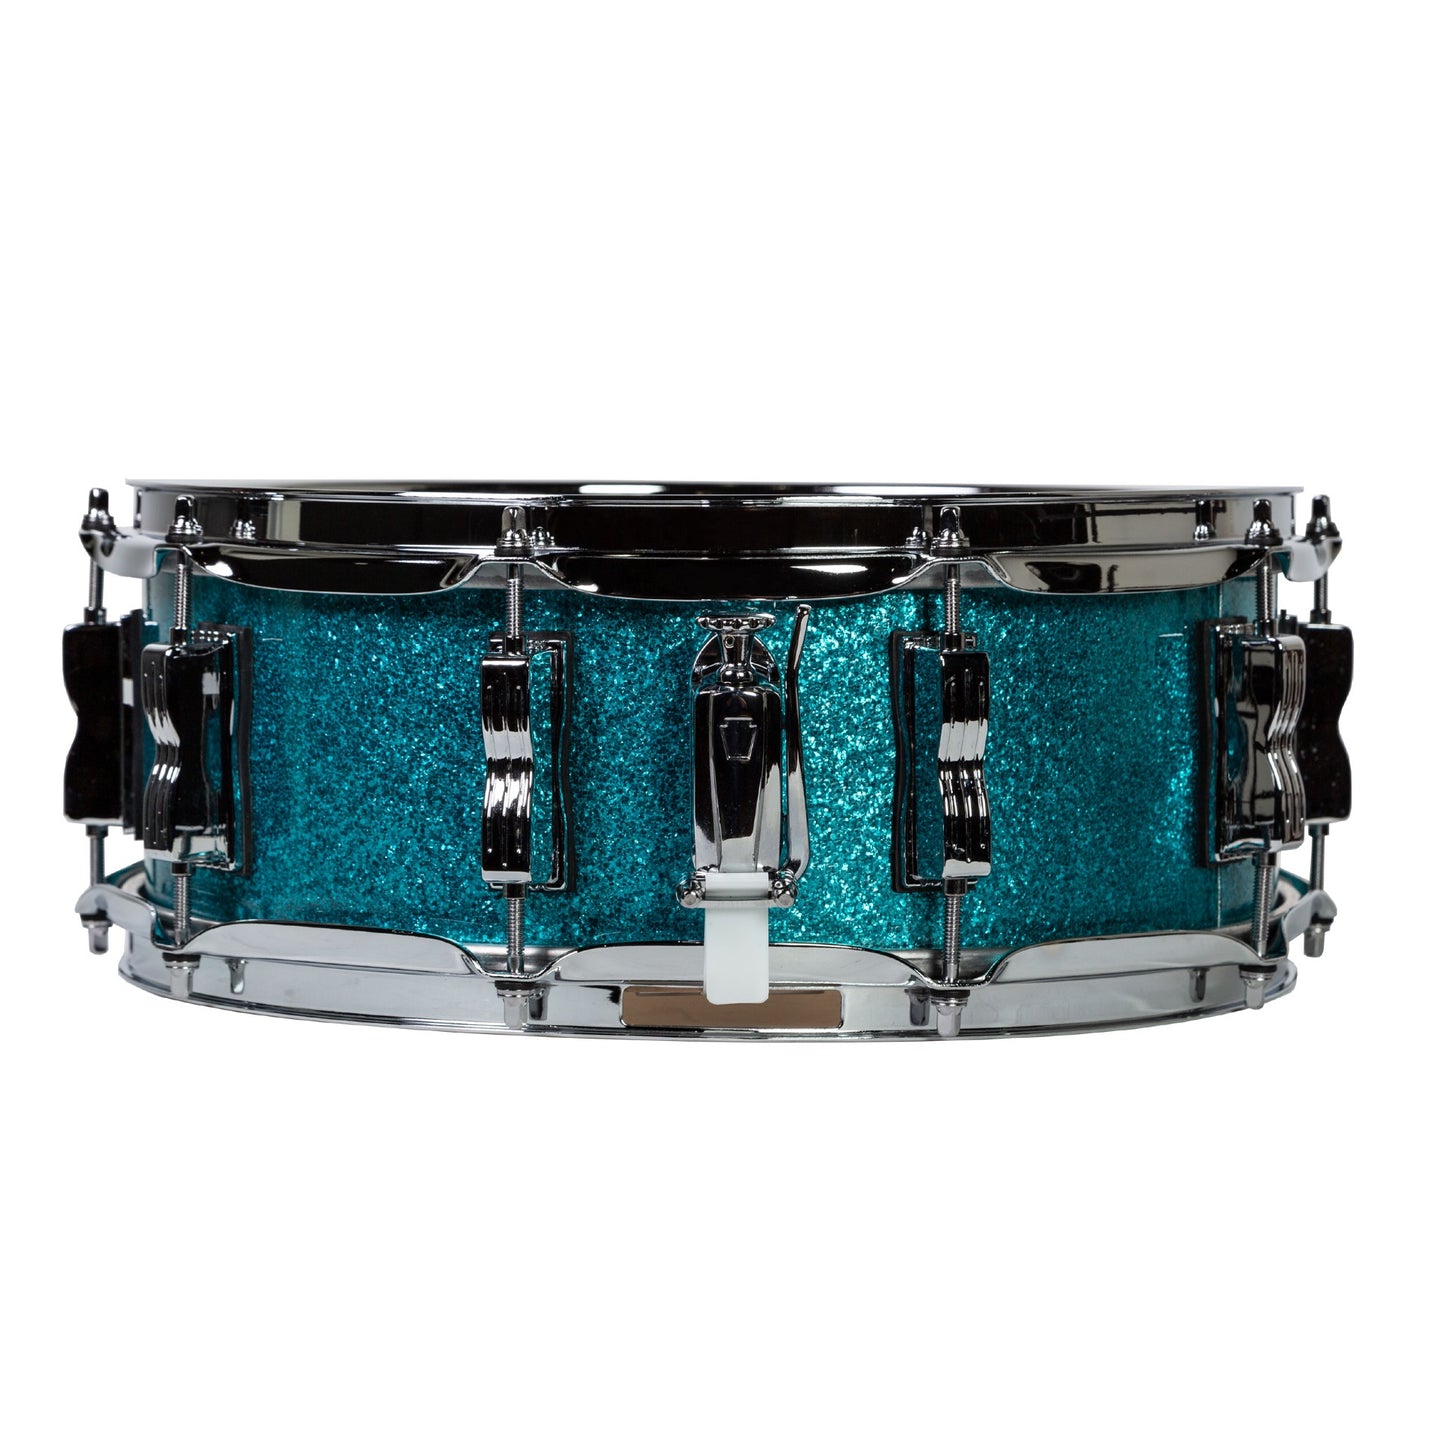 Ludwig Classic Maple 5x14 Snare Drum - Teal Blue Sparkle